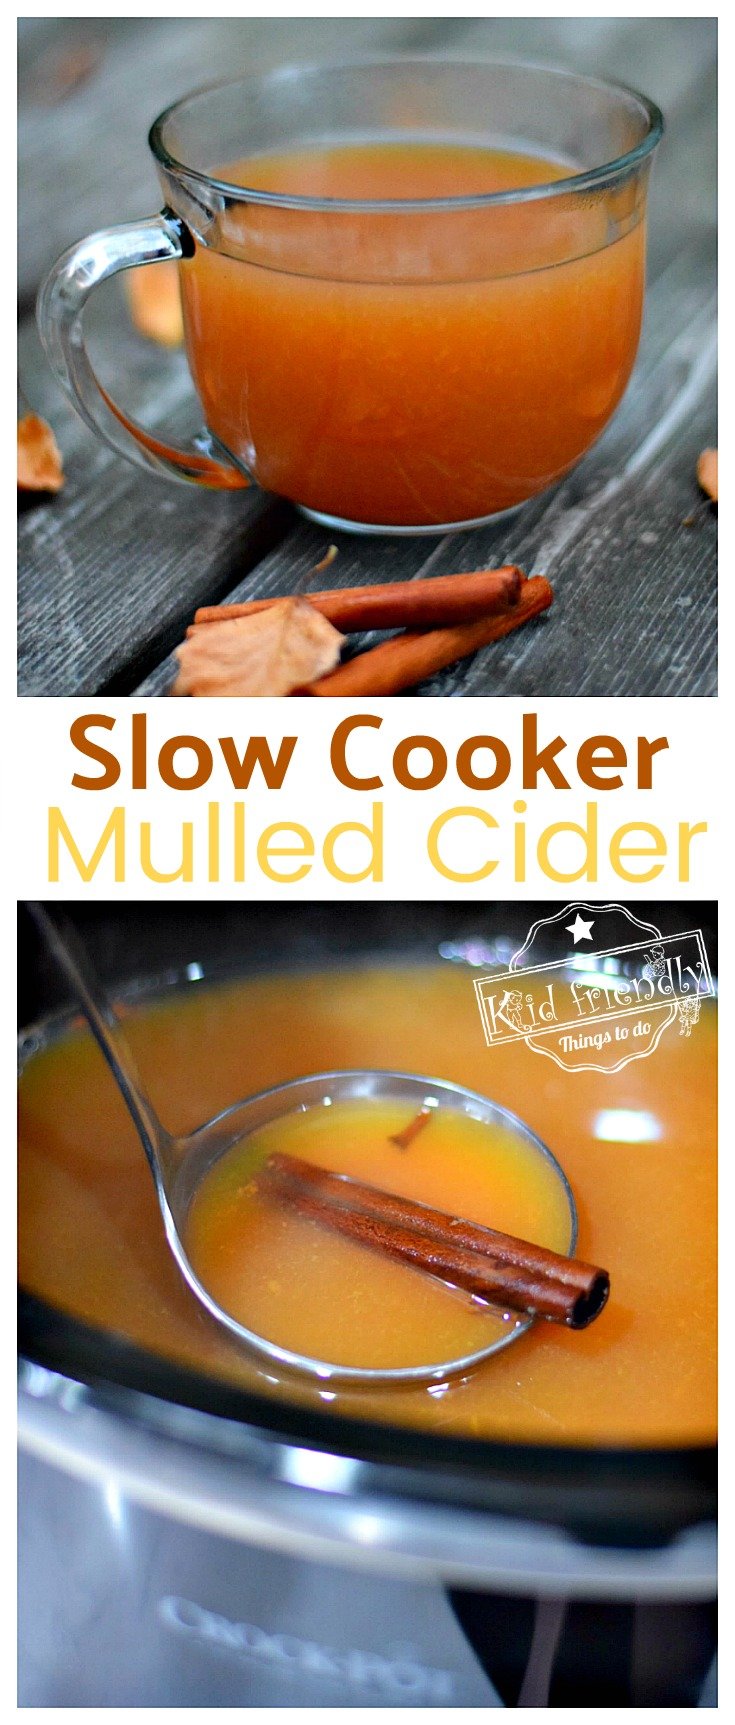 Delicious Slow Cooker Mulled Cider Recipe - perfect crock pot recipe for fall and winter nights - www.kidfriendlythingstodo.com